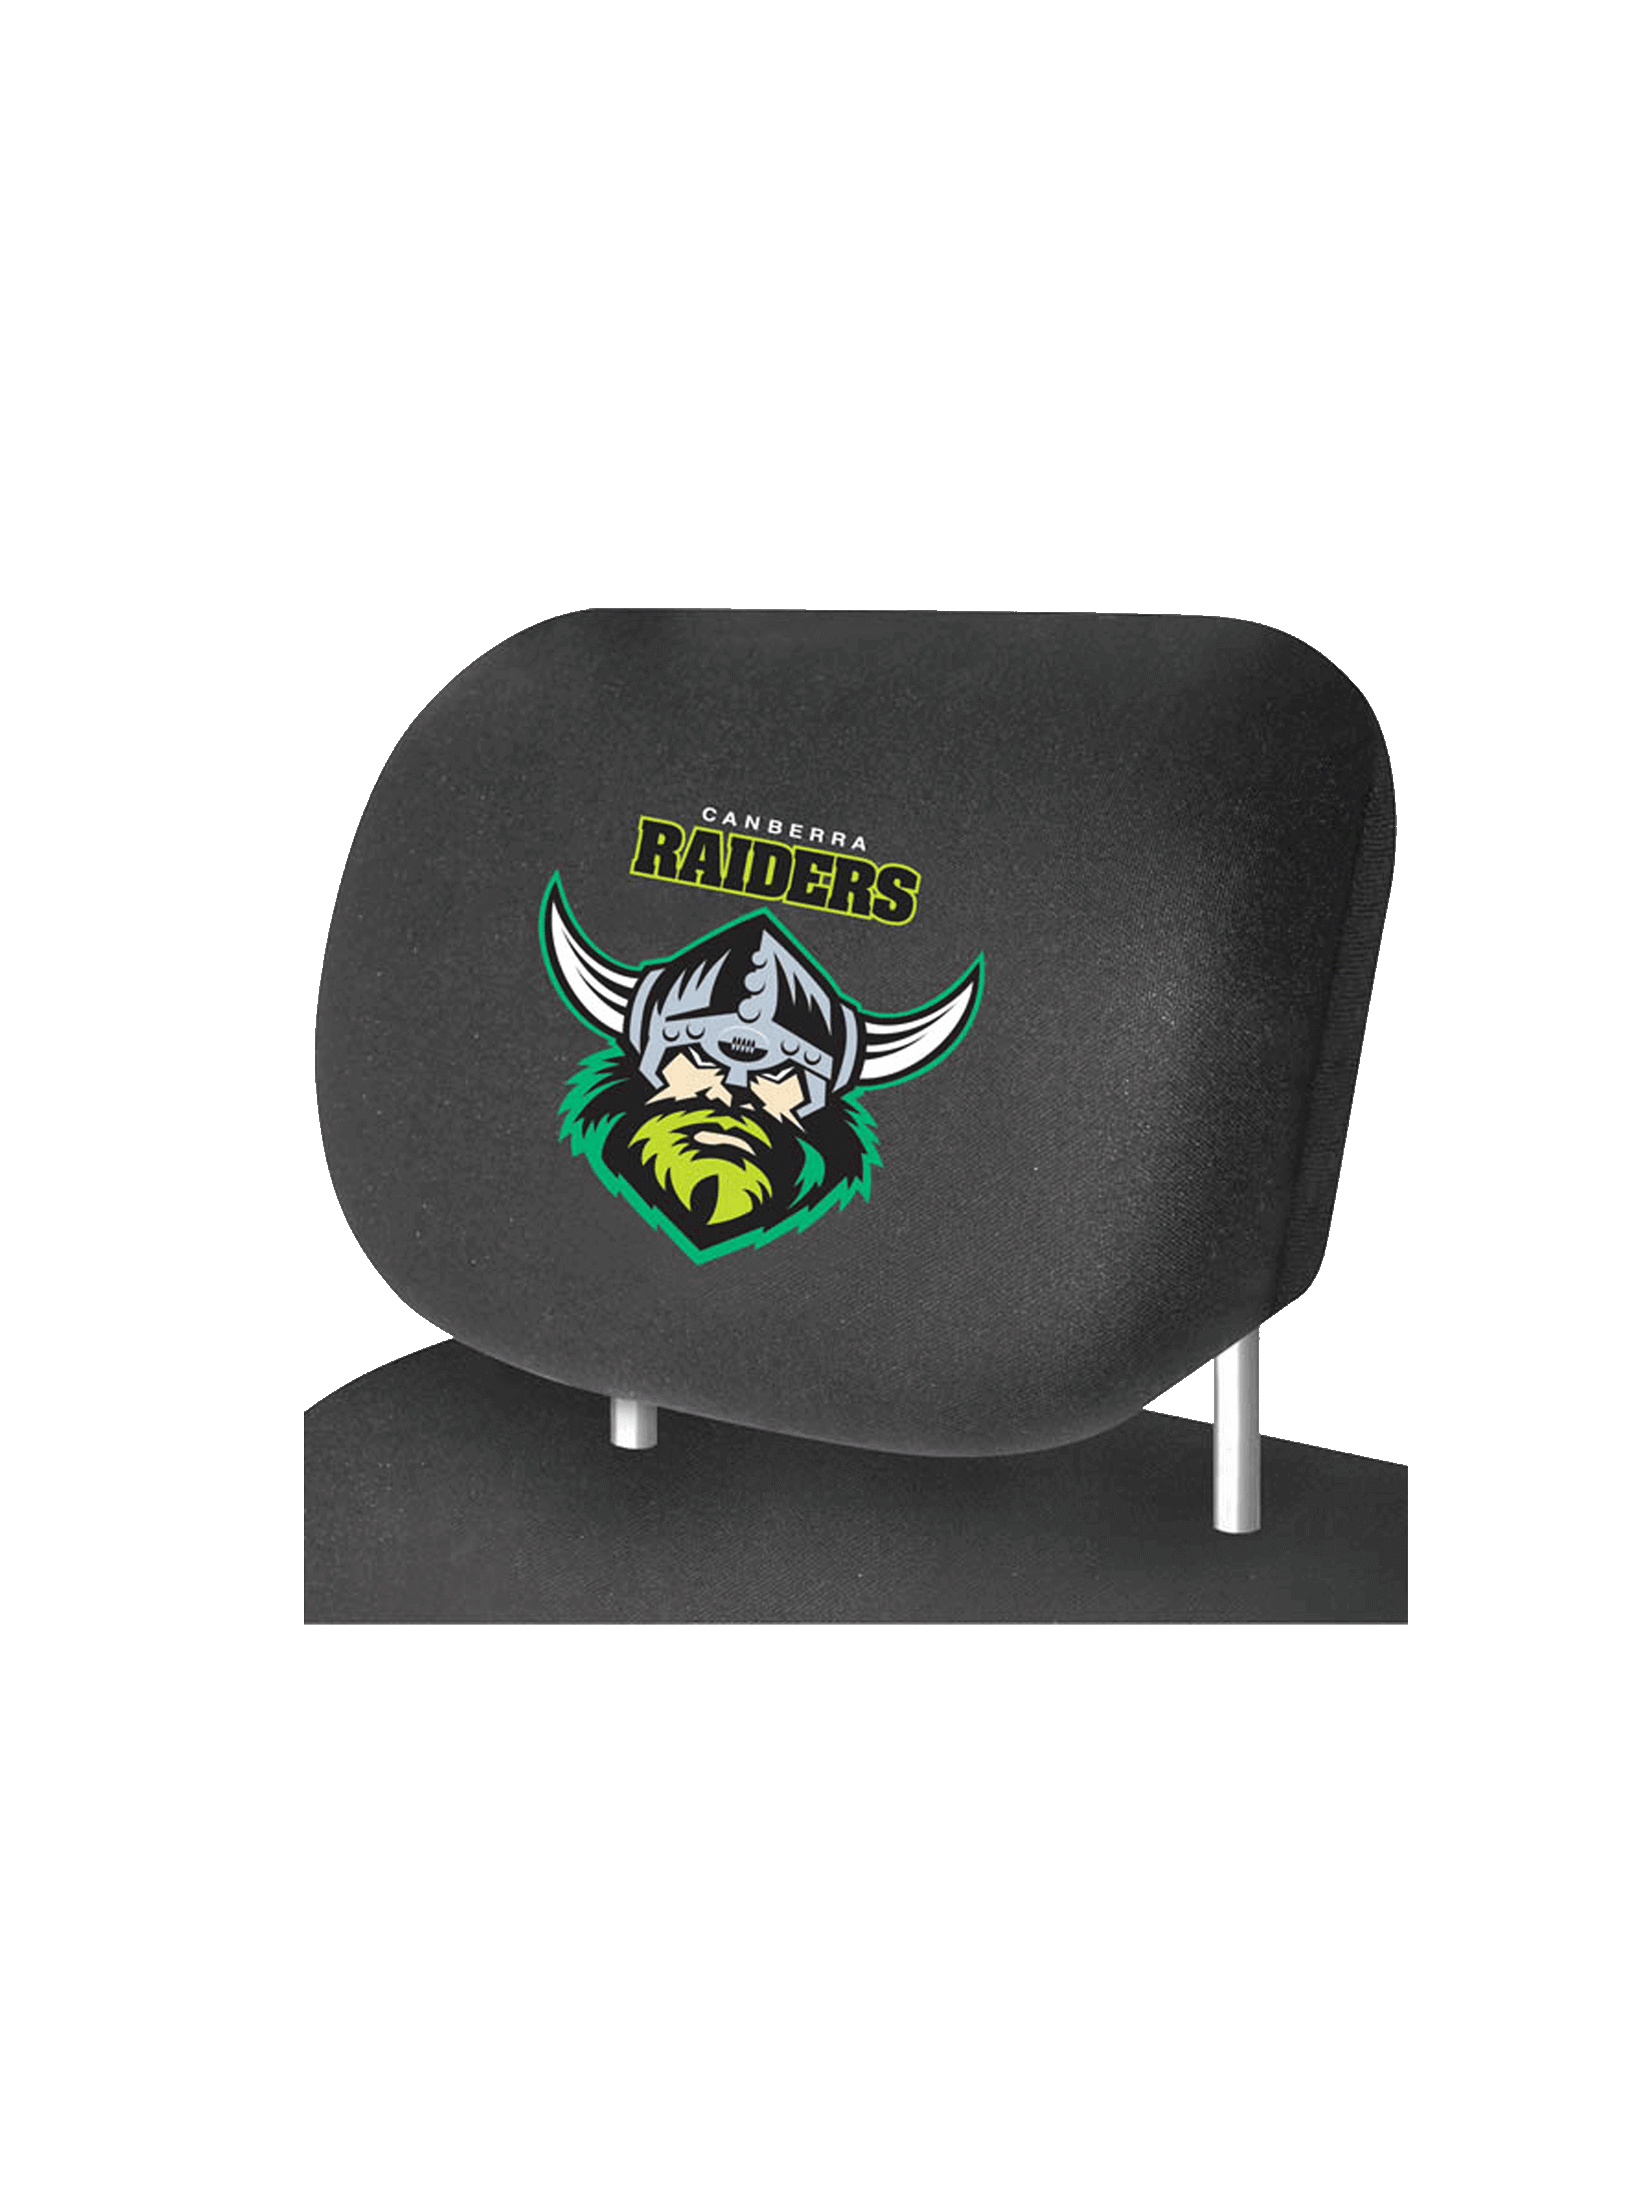 CANBERRA RAIDERS OFFICIAL HEADREST COVER_CANBERRA RAIDERS_ STUBBY CLUB